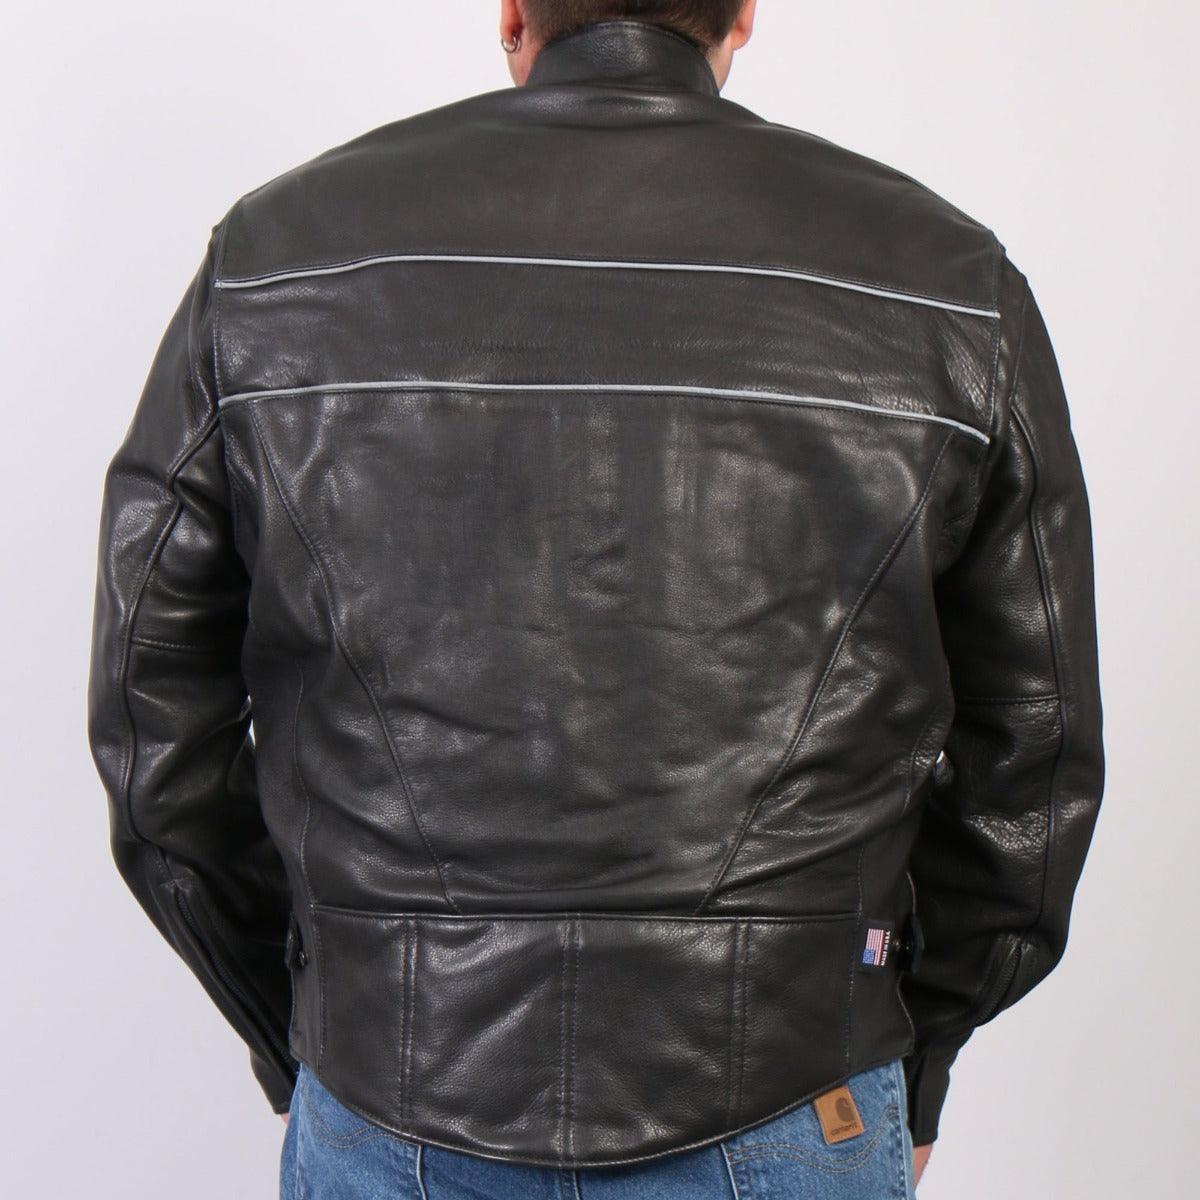 Hot Leathers Men's Usa Made Premium Leather Motorcycle Jacket With Reflective Piping - American Legend Rider